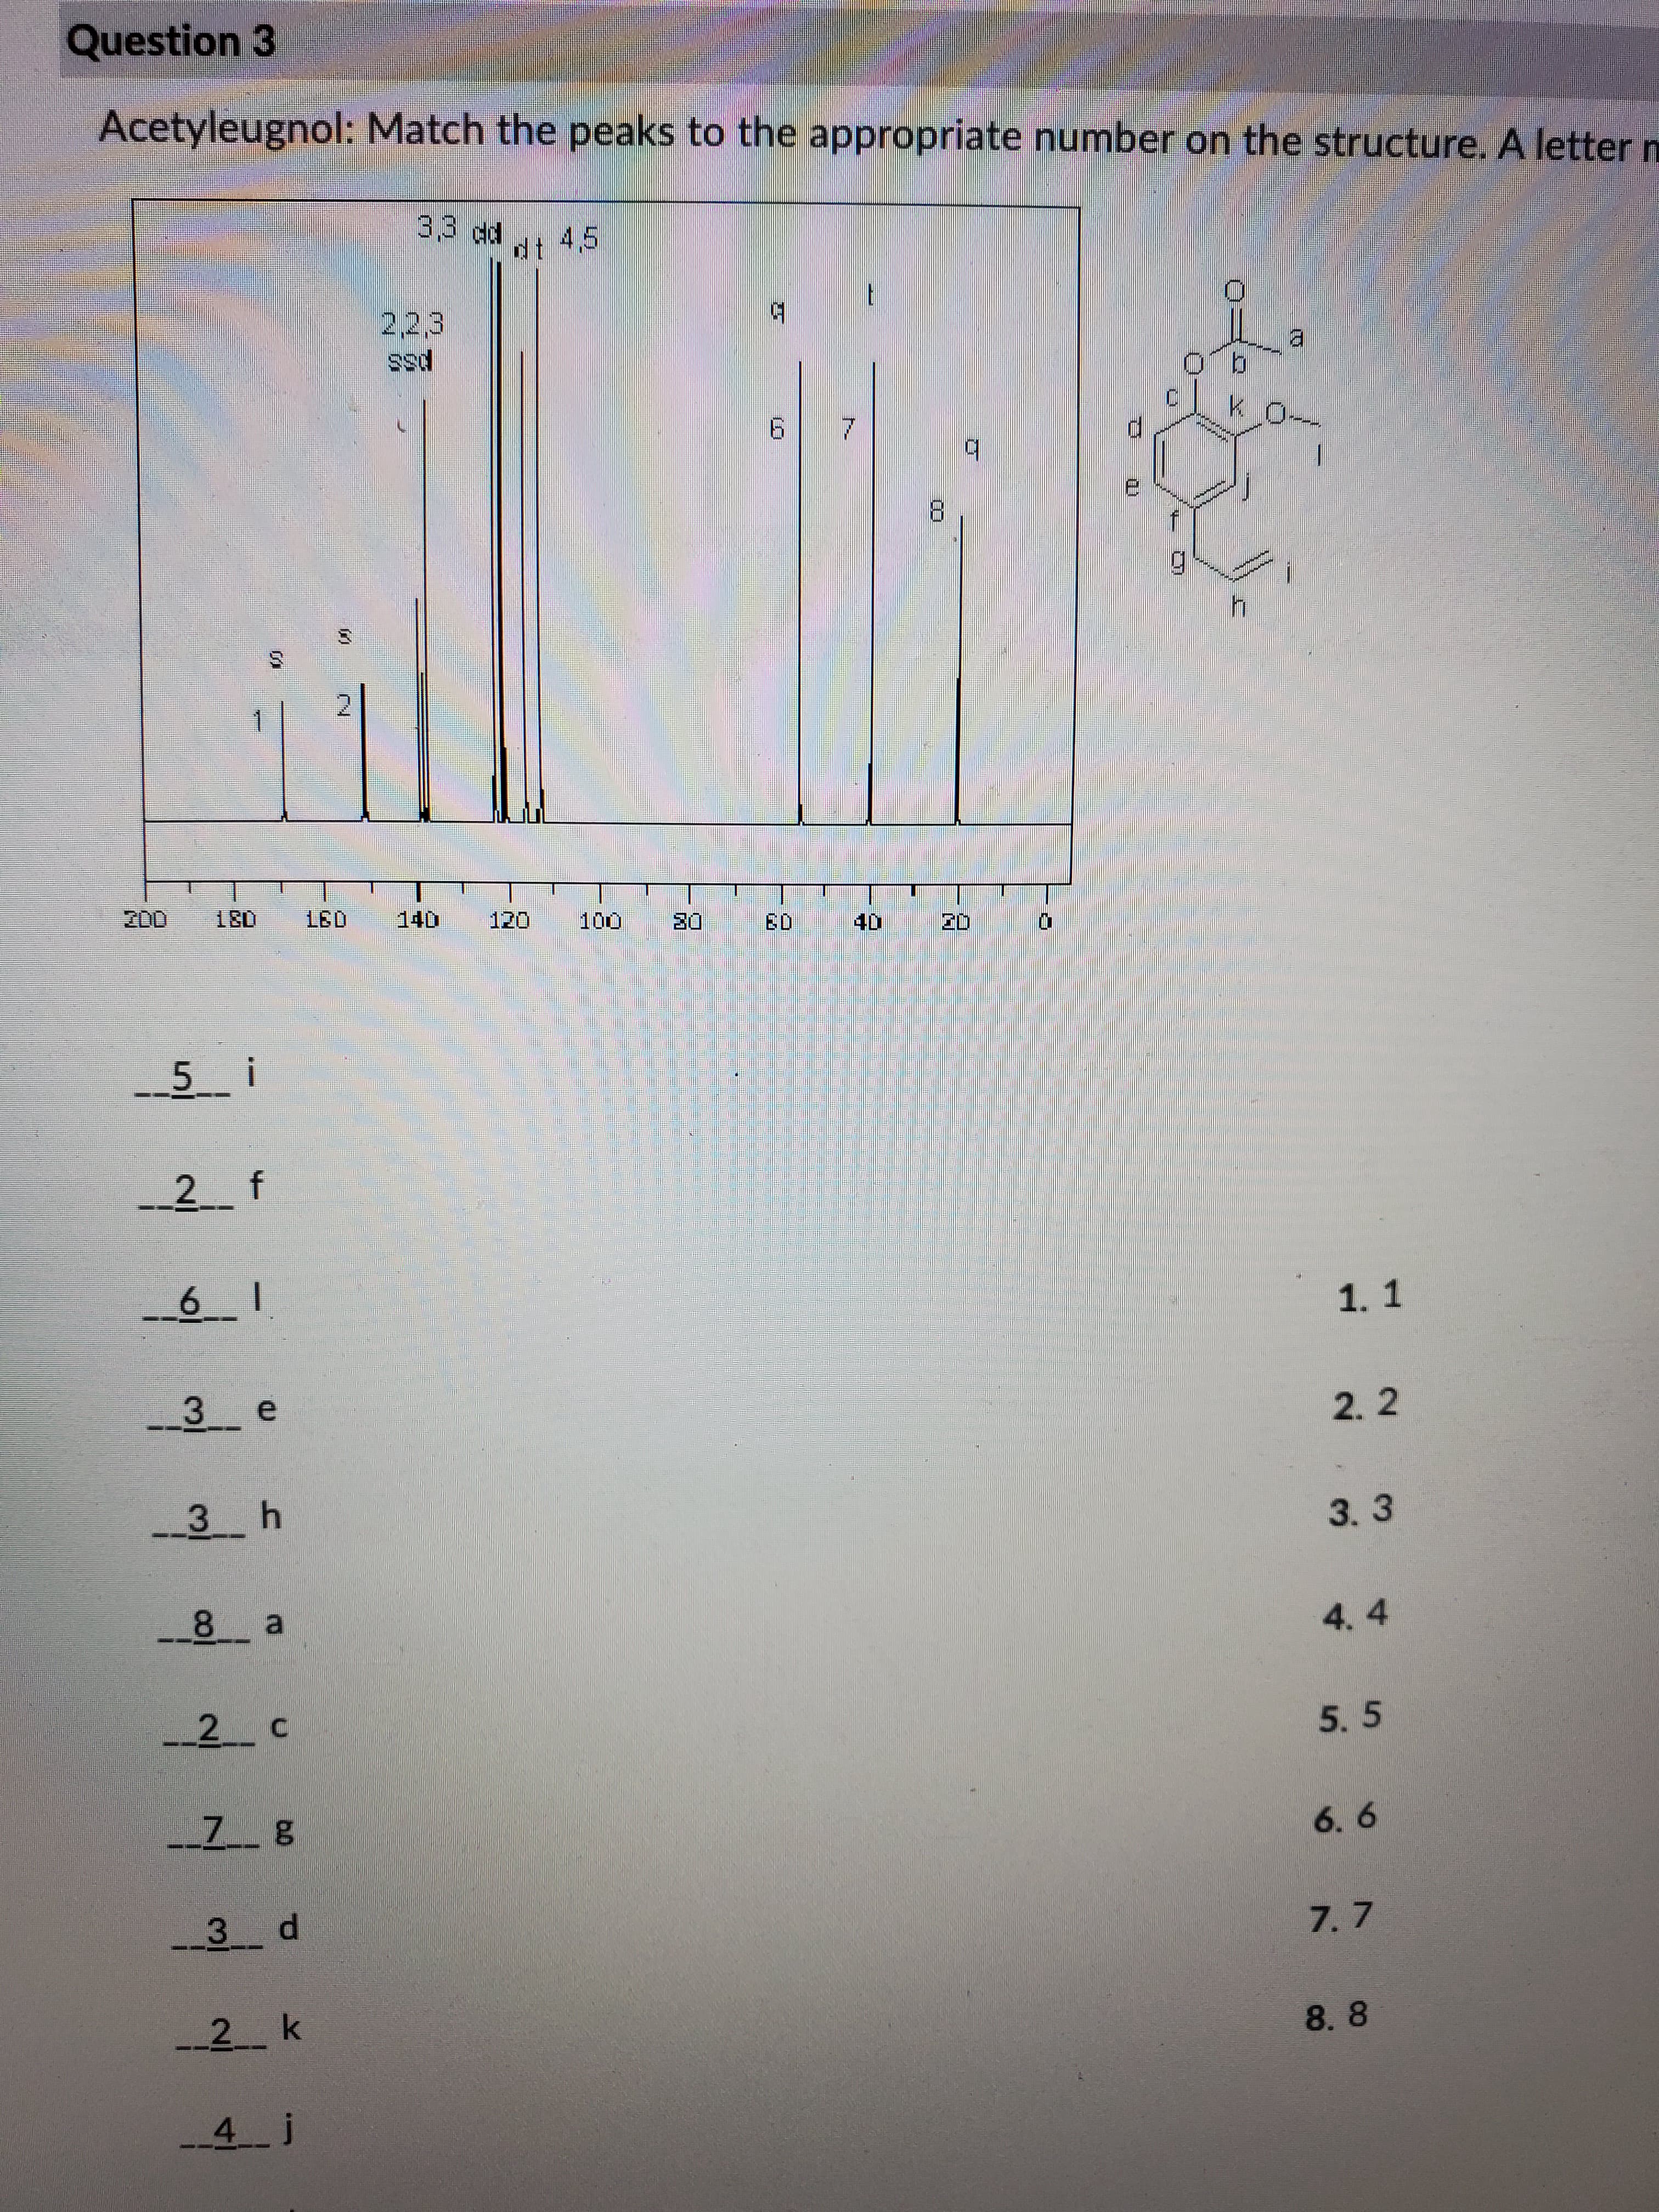 Acetyleugnol: Match the peaks to the appropriate number on the structure.
